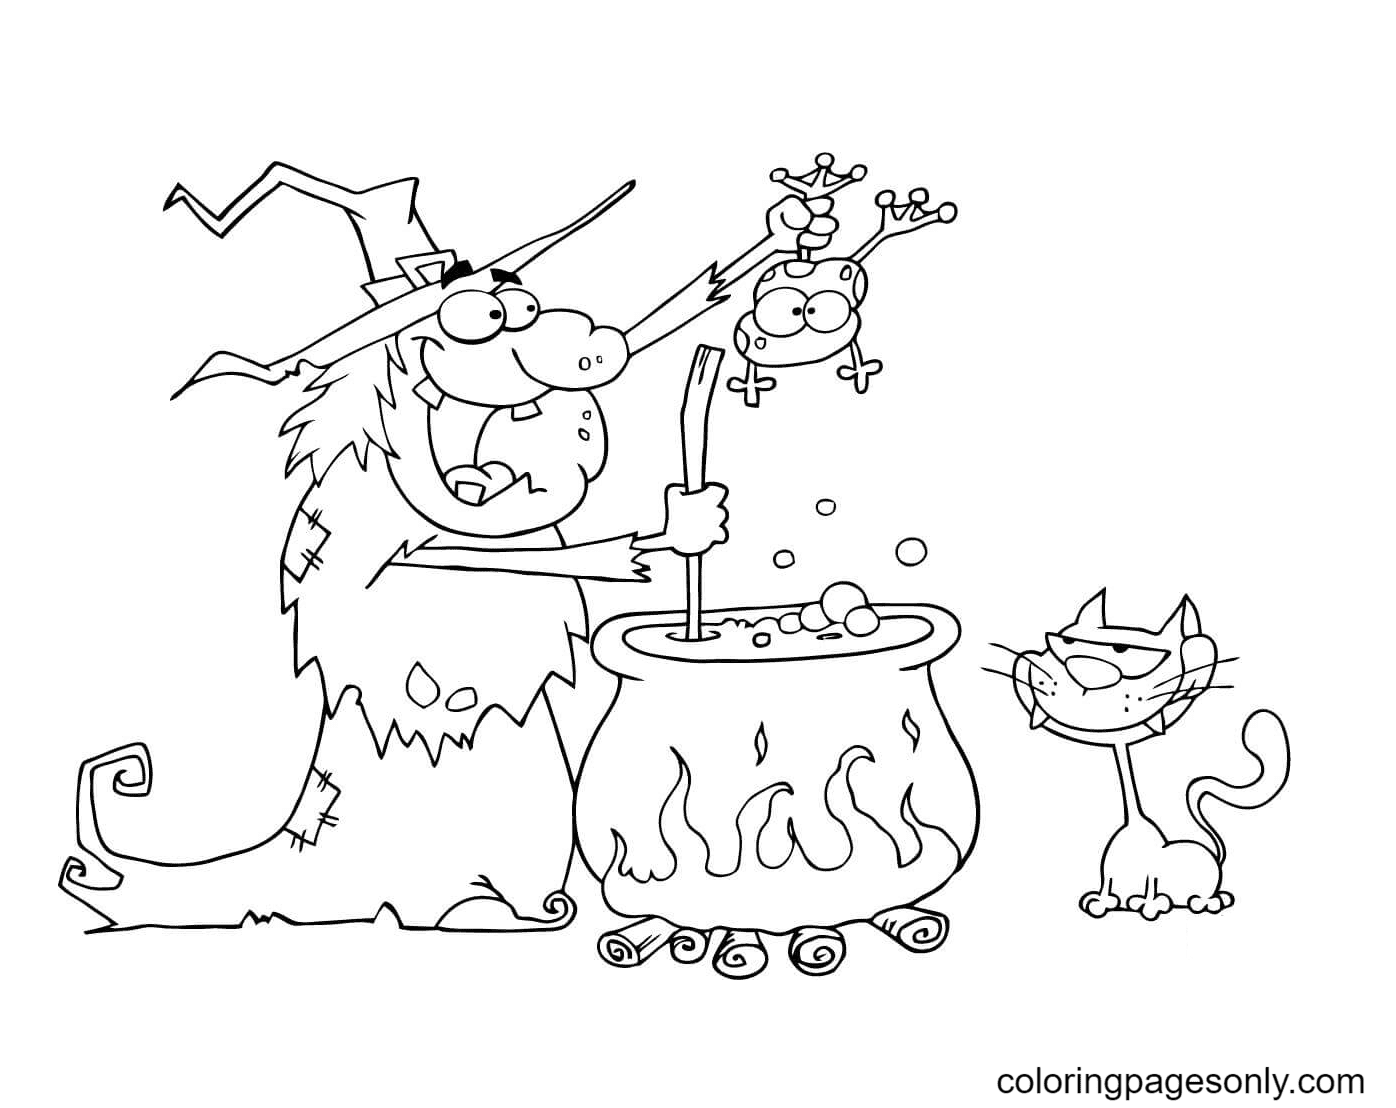 Witch holding a Frog Preparing to Cook Medicine Coloring Page